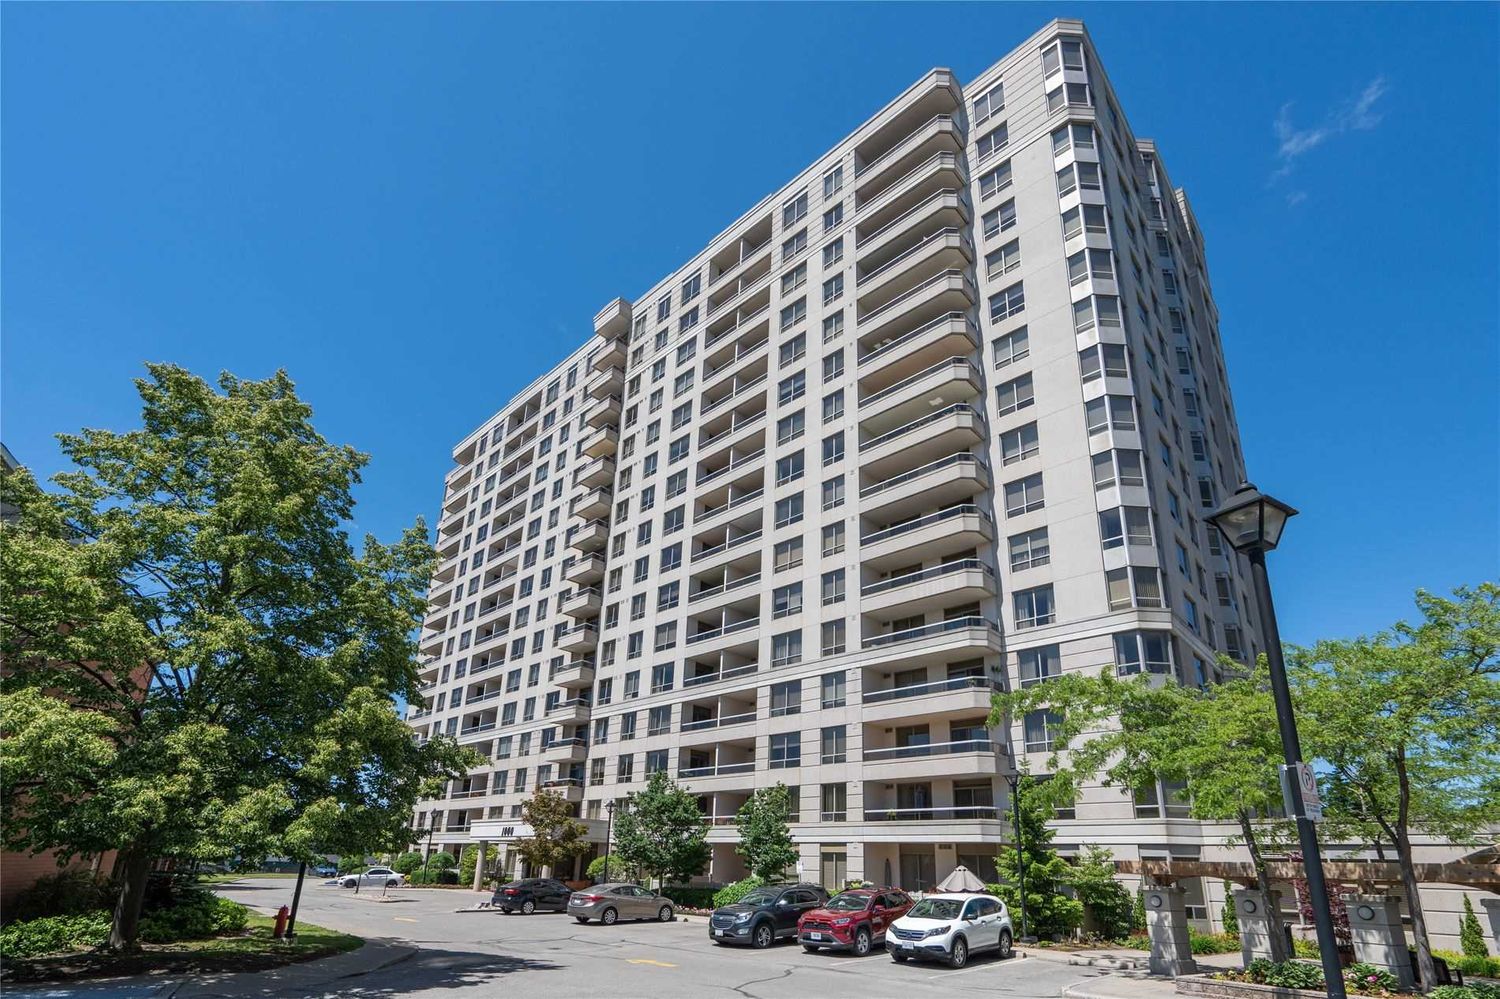 1000 The Esplanade N. Millenium At Discovery Place Condos is located in  Pickering, Toronto - image #1 of 3